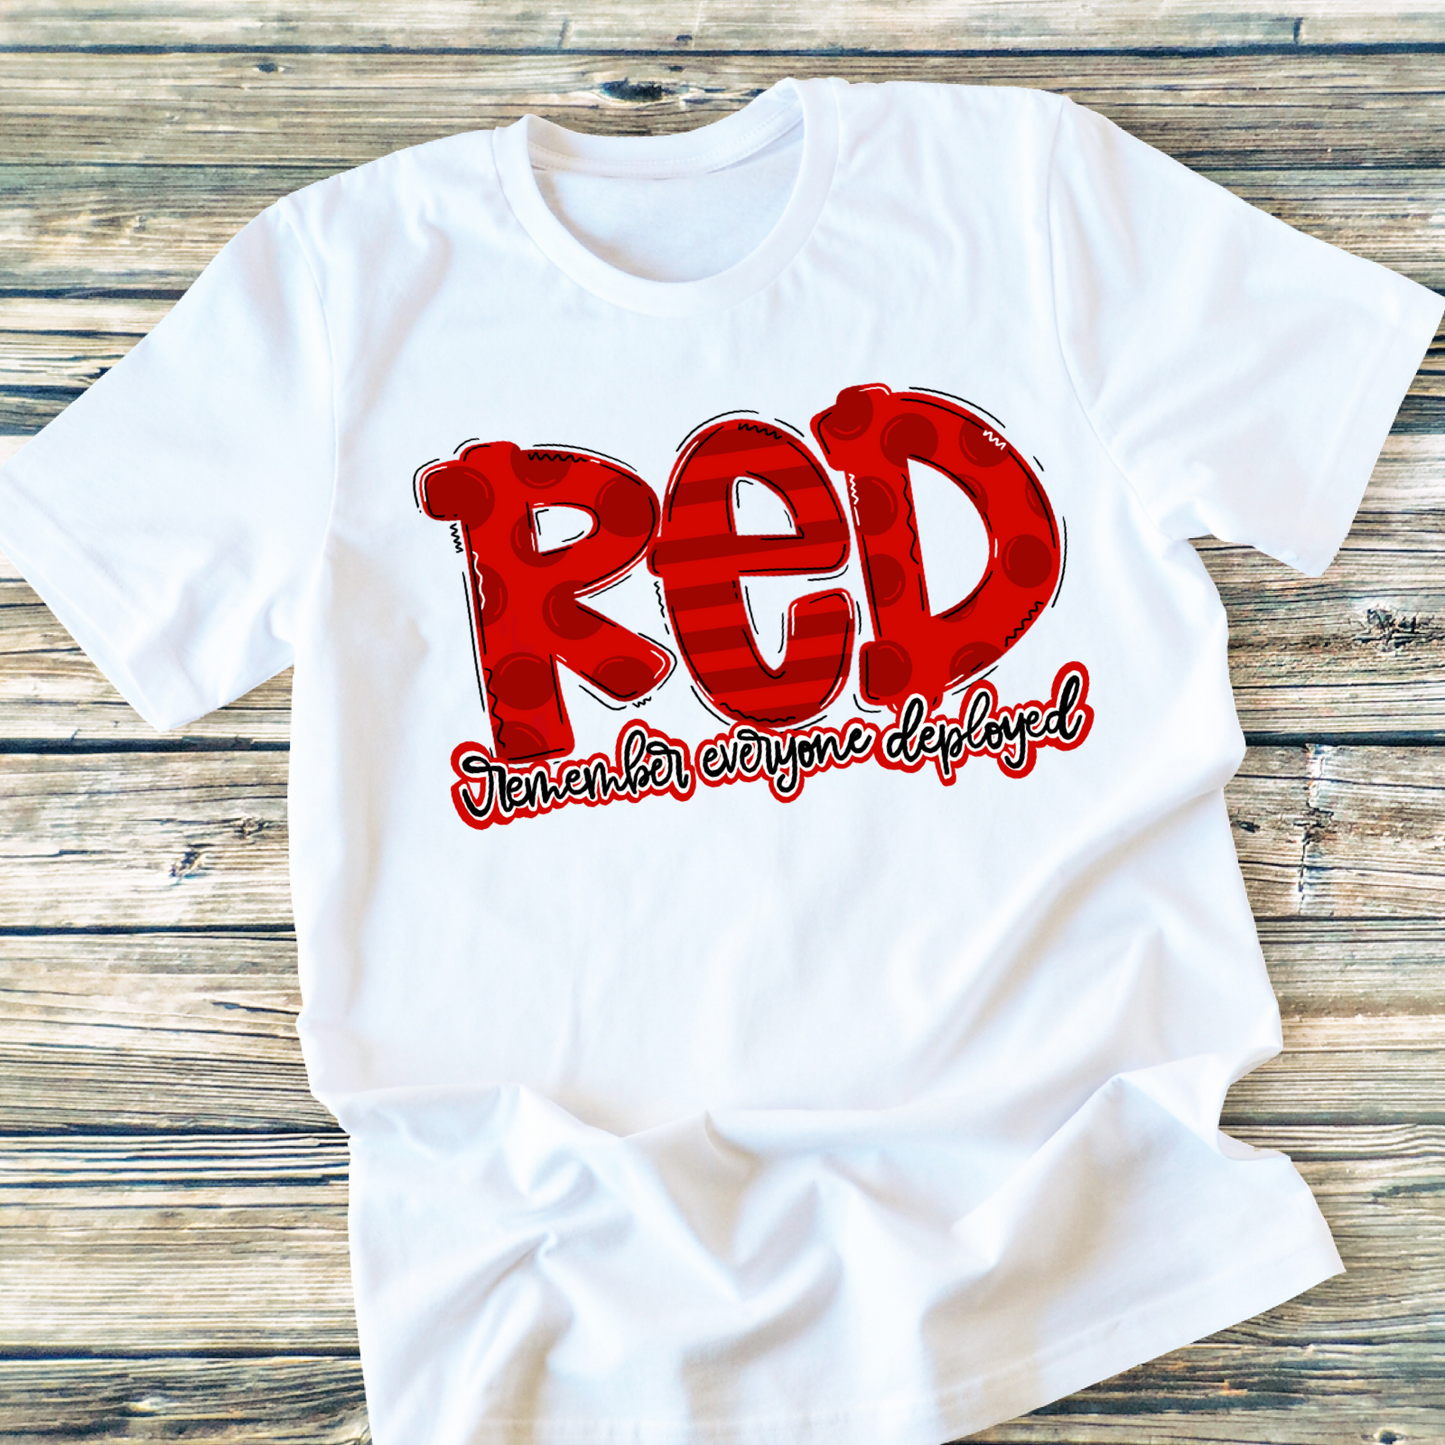 RED remember our troops DTF TRANSFERPRINT TO ORDER